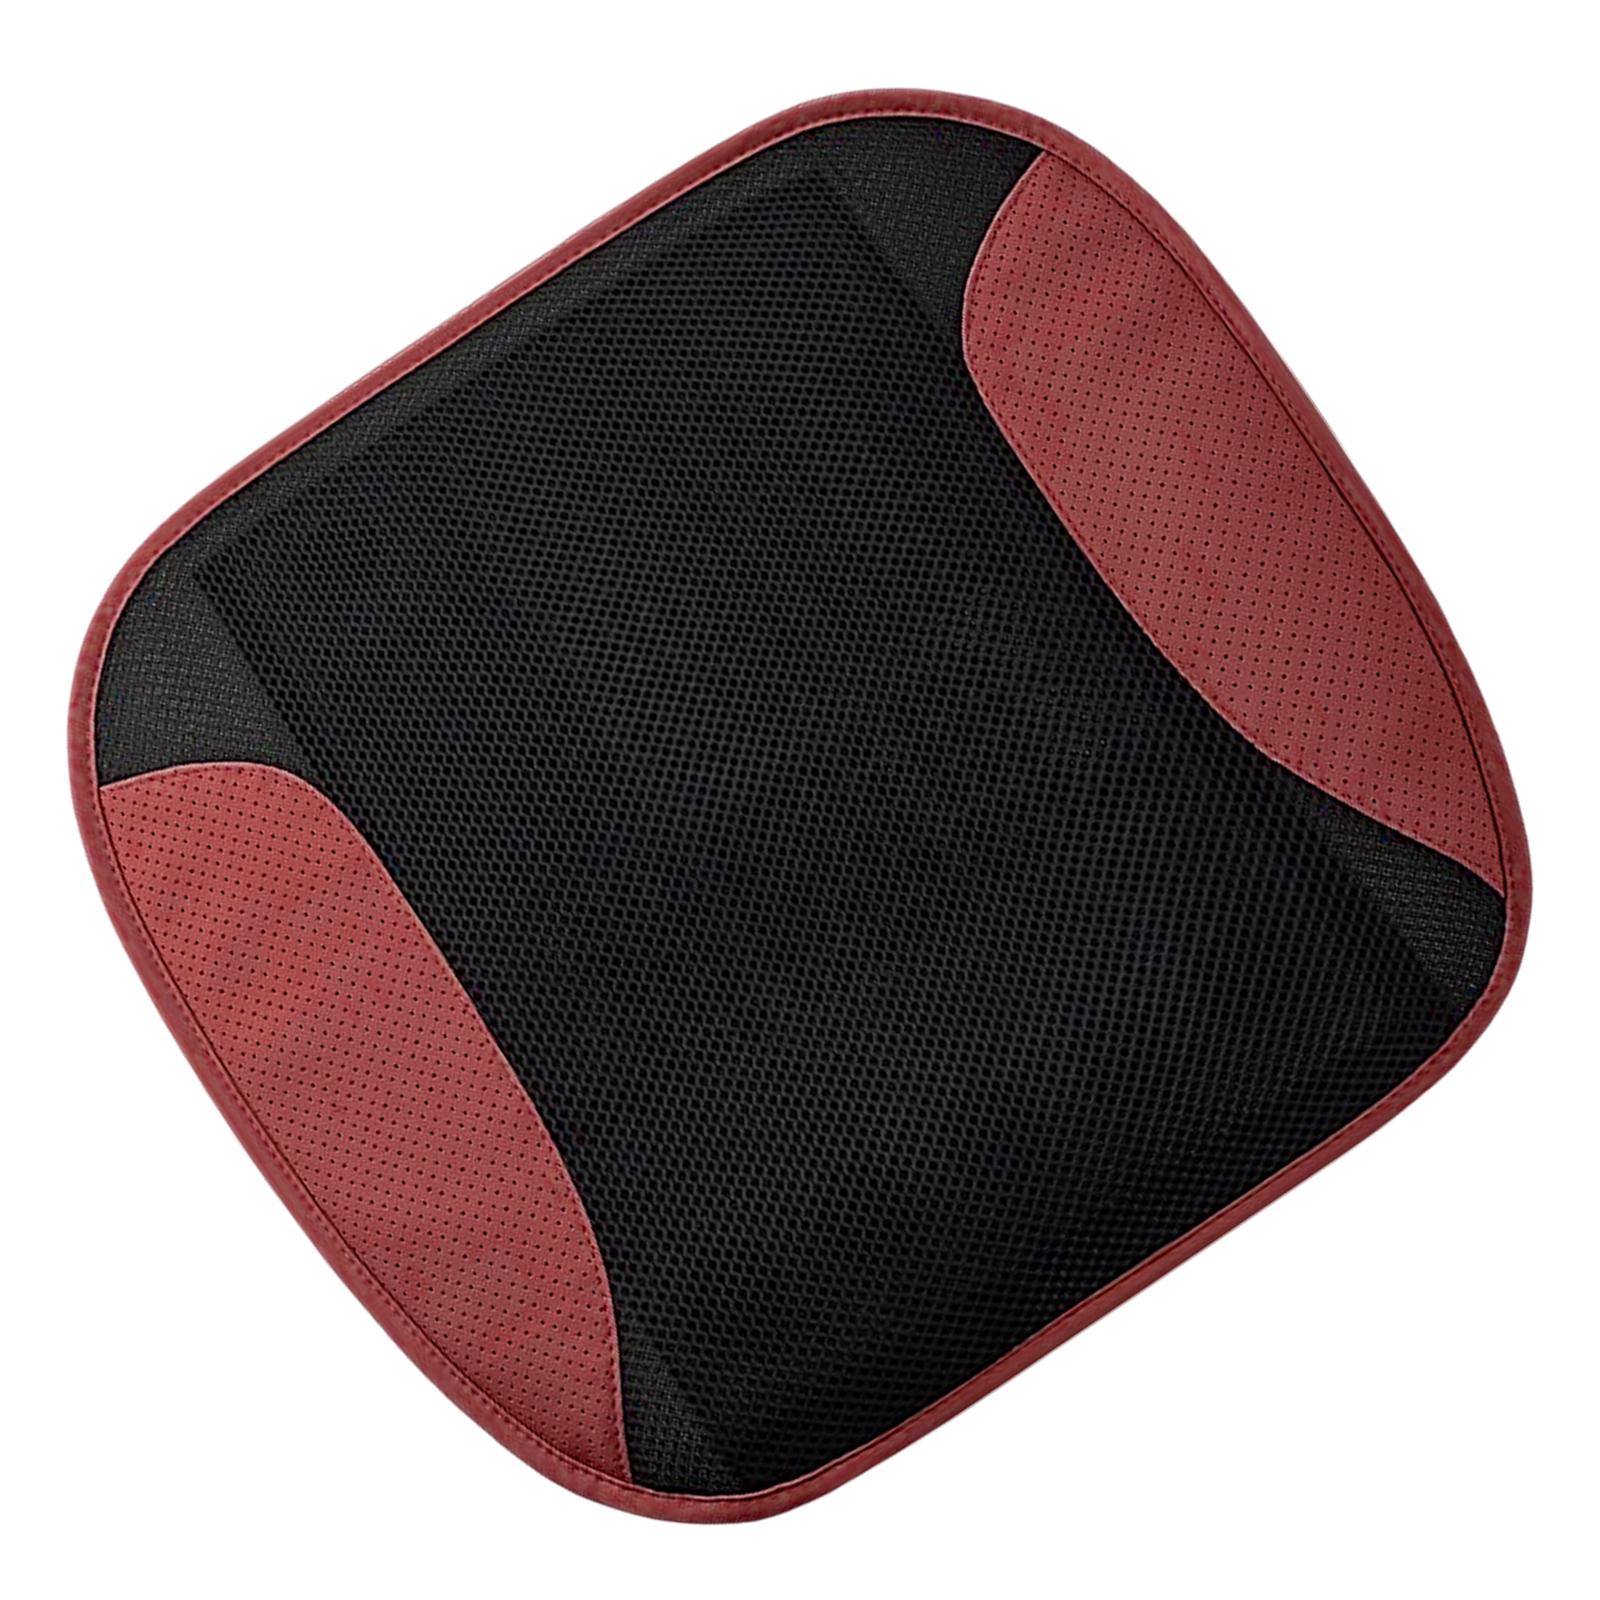 Car Seat Cover USB Port 5 Cooling Fans Inside for Office Chair Car Red